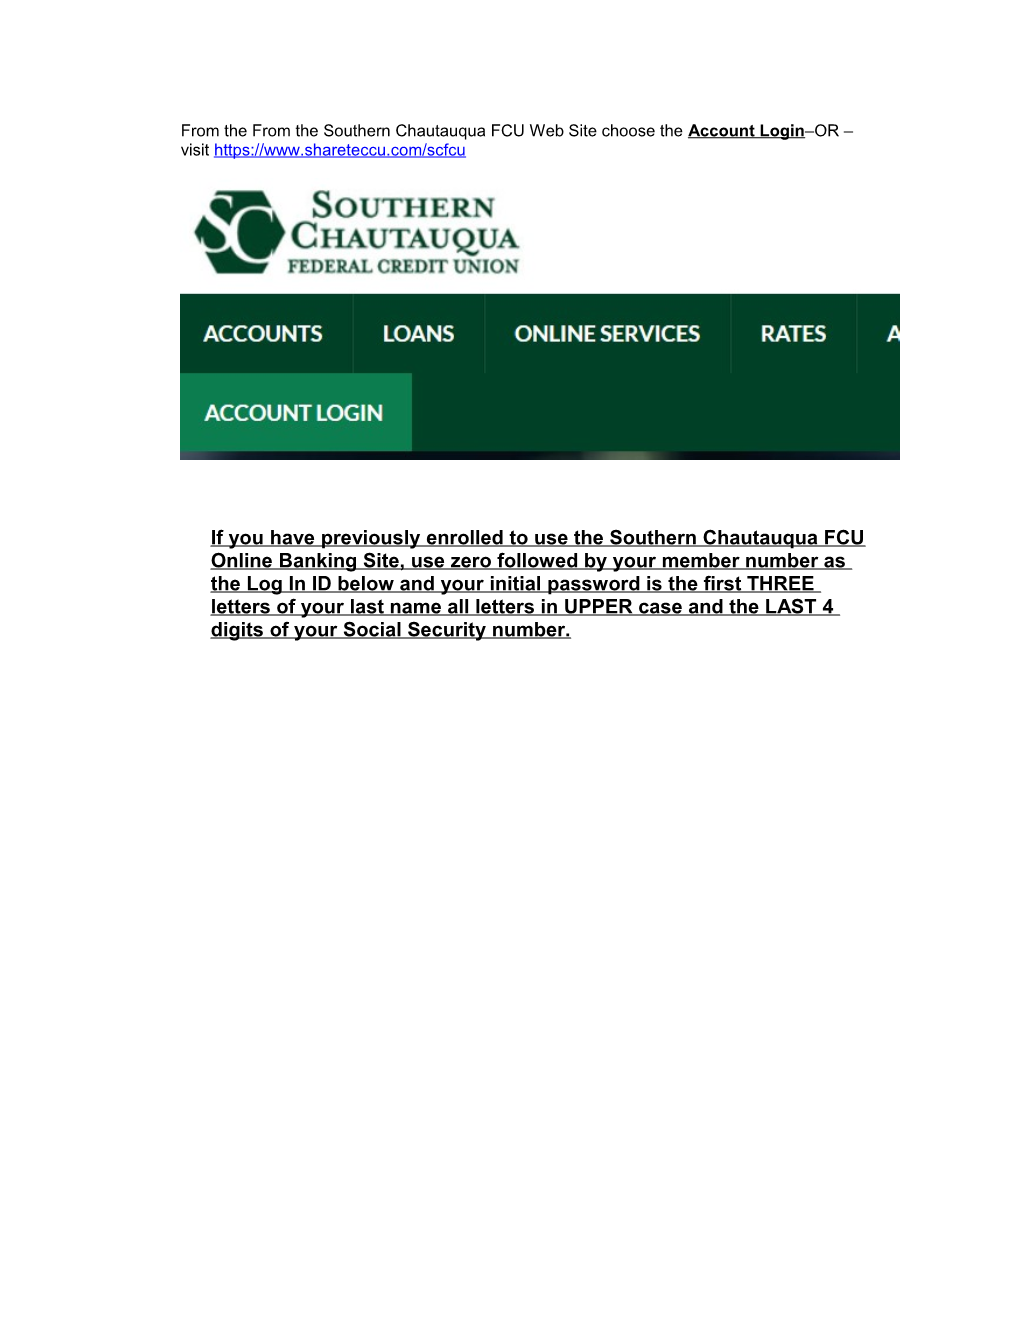 From the from the Southern Chautauqua FCU Web Site Choose the Account Login OR Visit